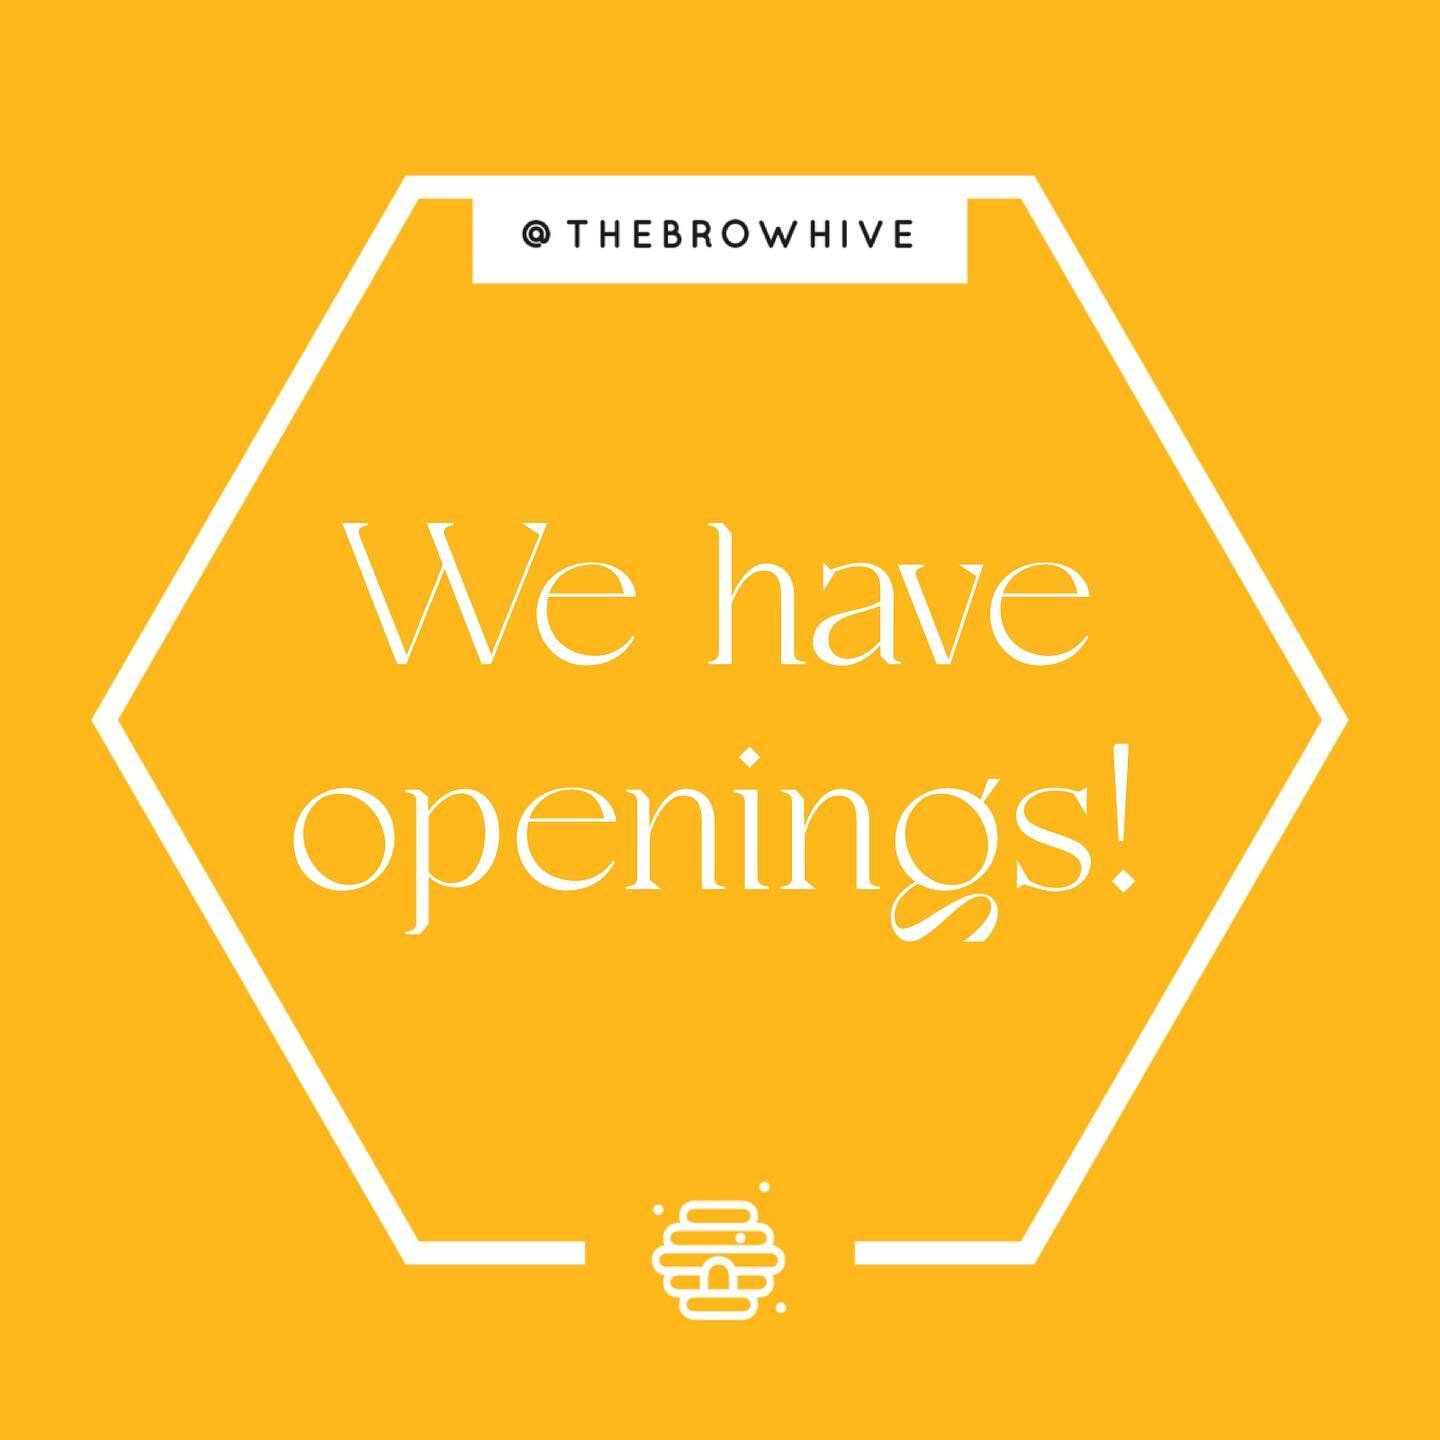 We have openings 🍯!! Click &ldquo;Book Now&rdquo; on our page to book your appointment 💛
Z
Z
Z
z
z
z
z
#thebrowhive #browsfromthehive #browhive #brows #utahbrows #browbar #browstudio #utahbrowstudio #utahbrowbar #browshaping #eyebrowshaping #browsh